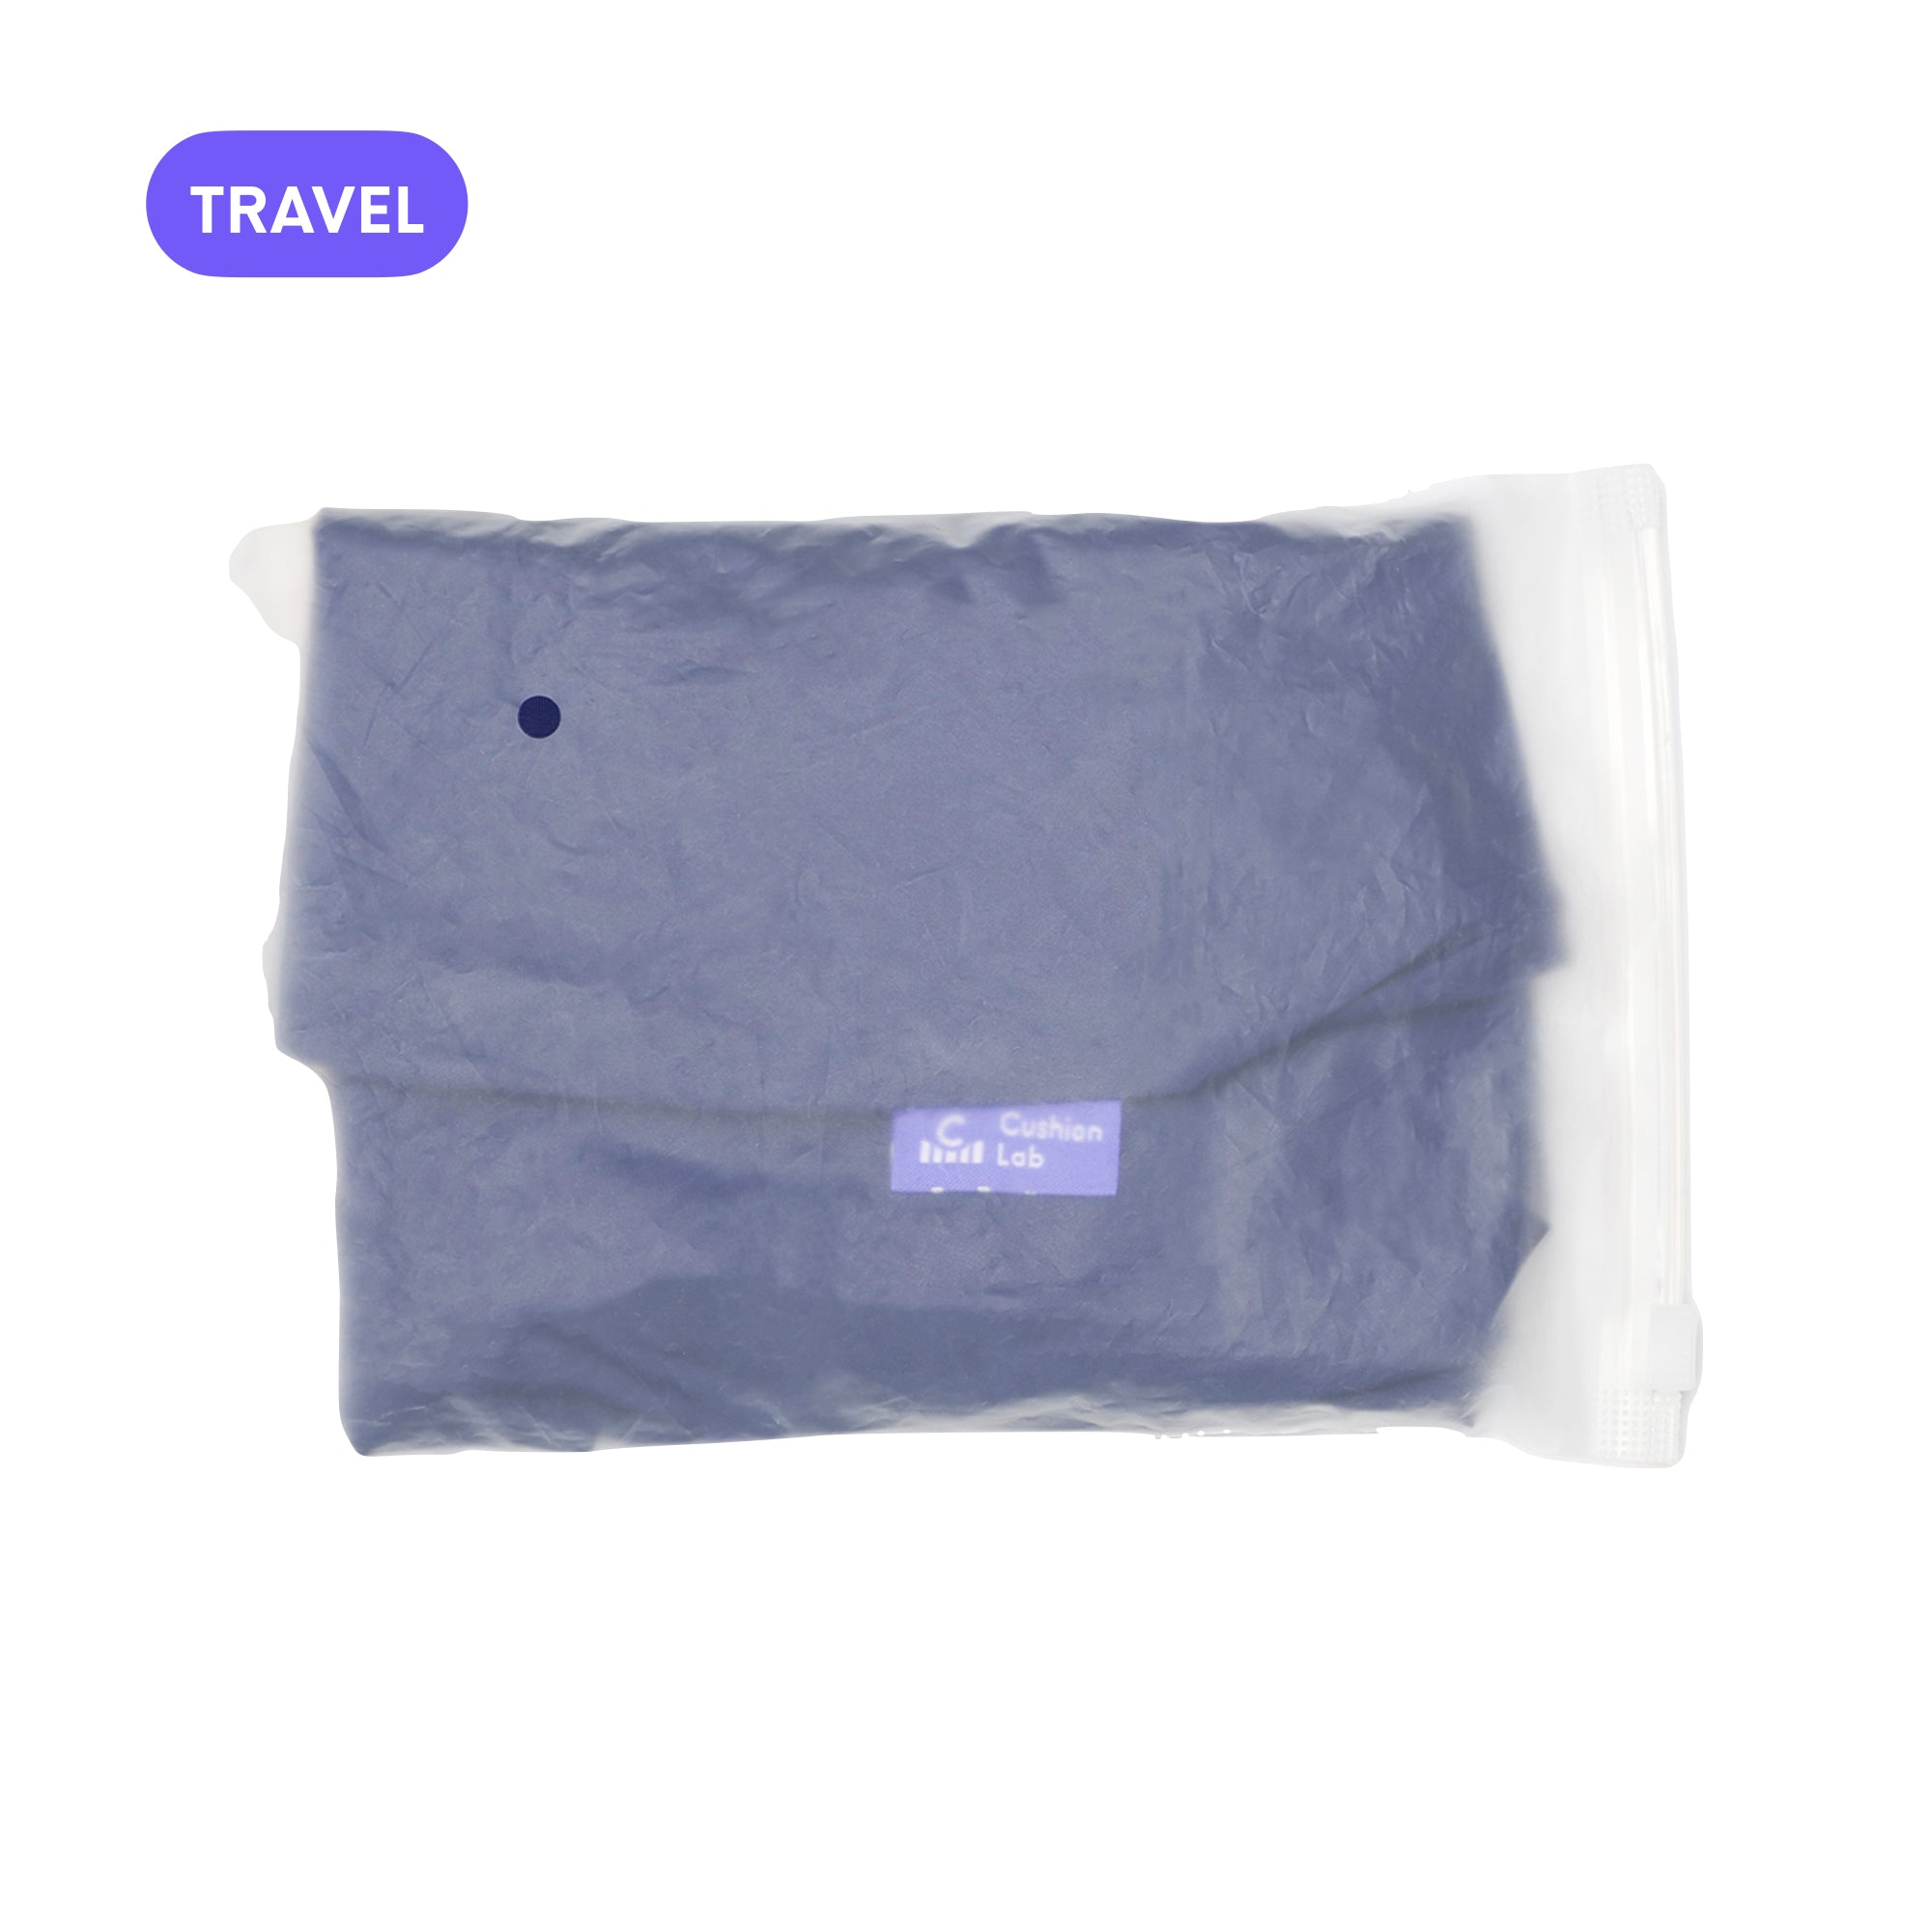 Cushion Lab, Other, New Cushion Lab Travel Pillow